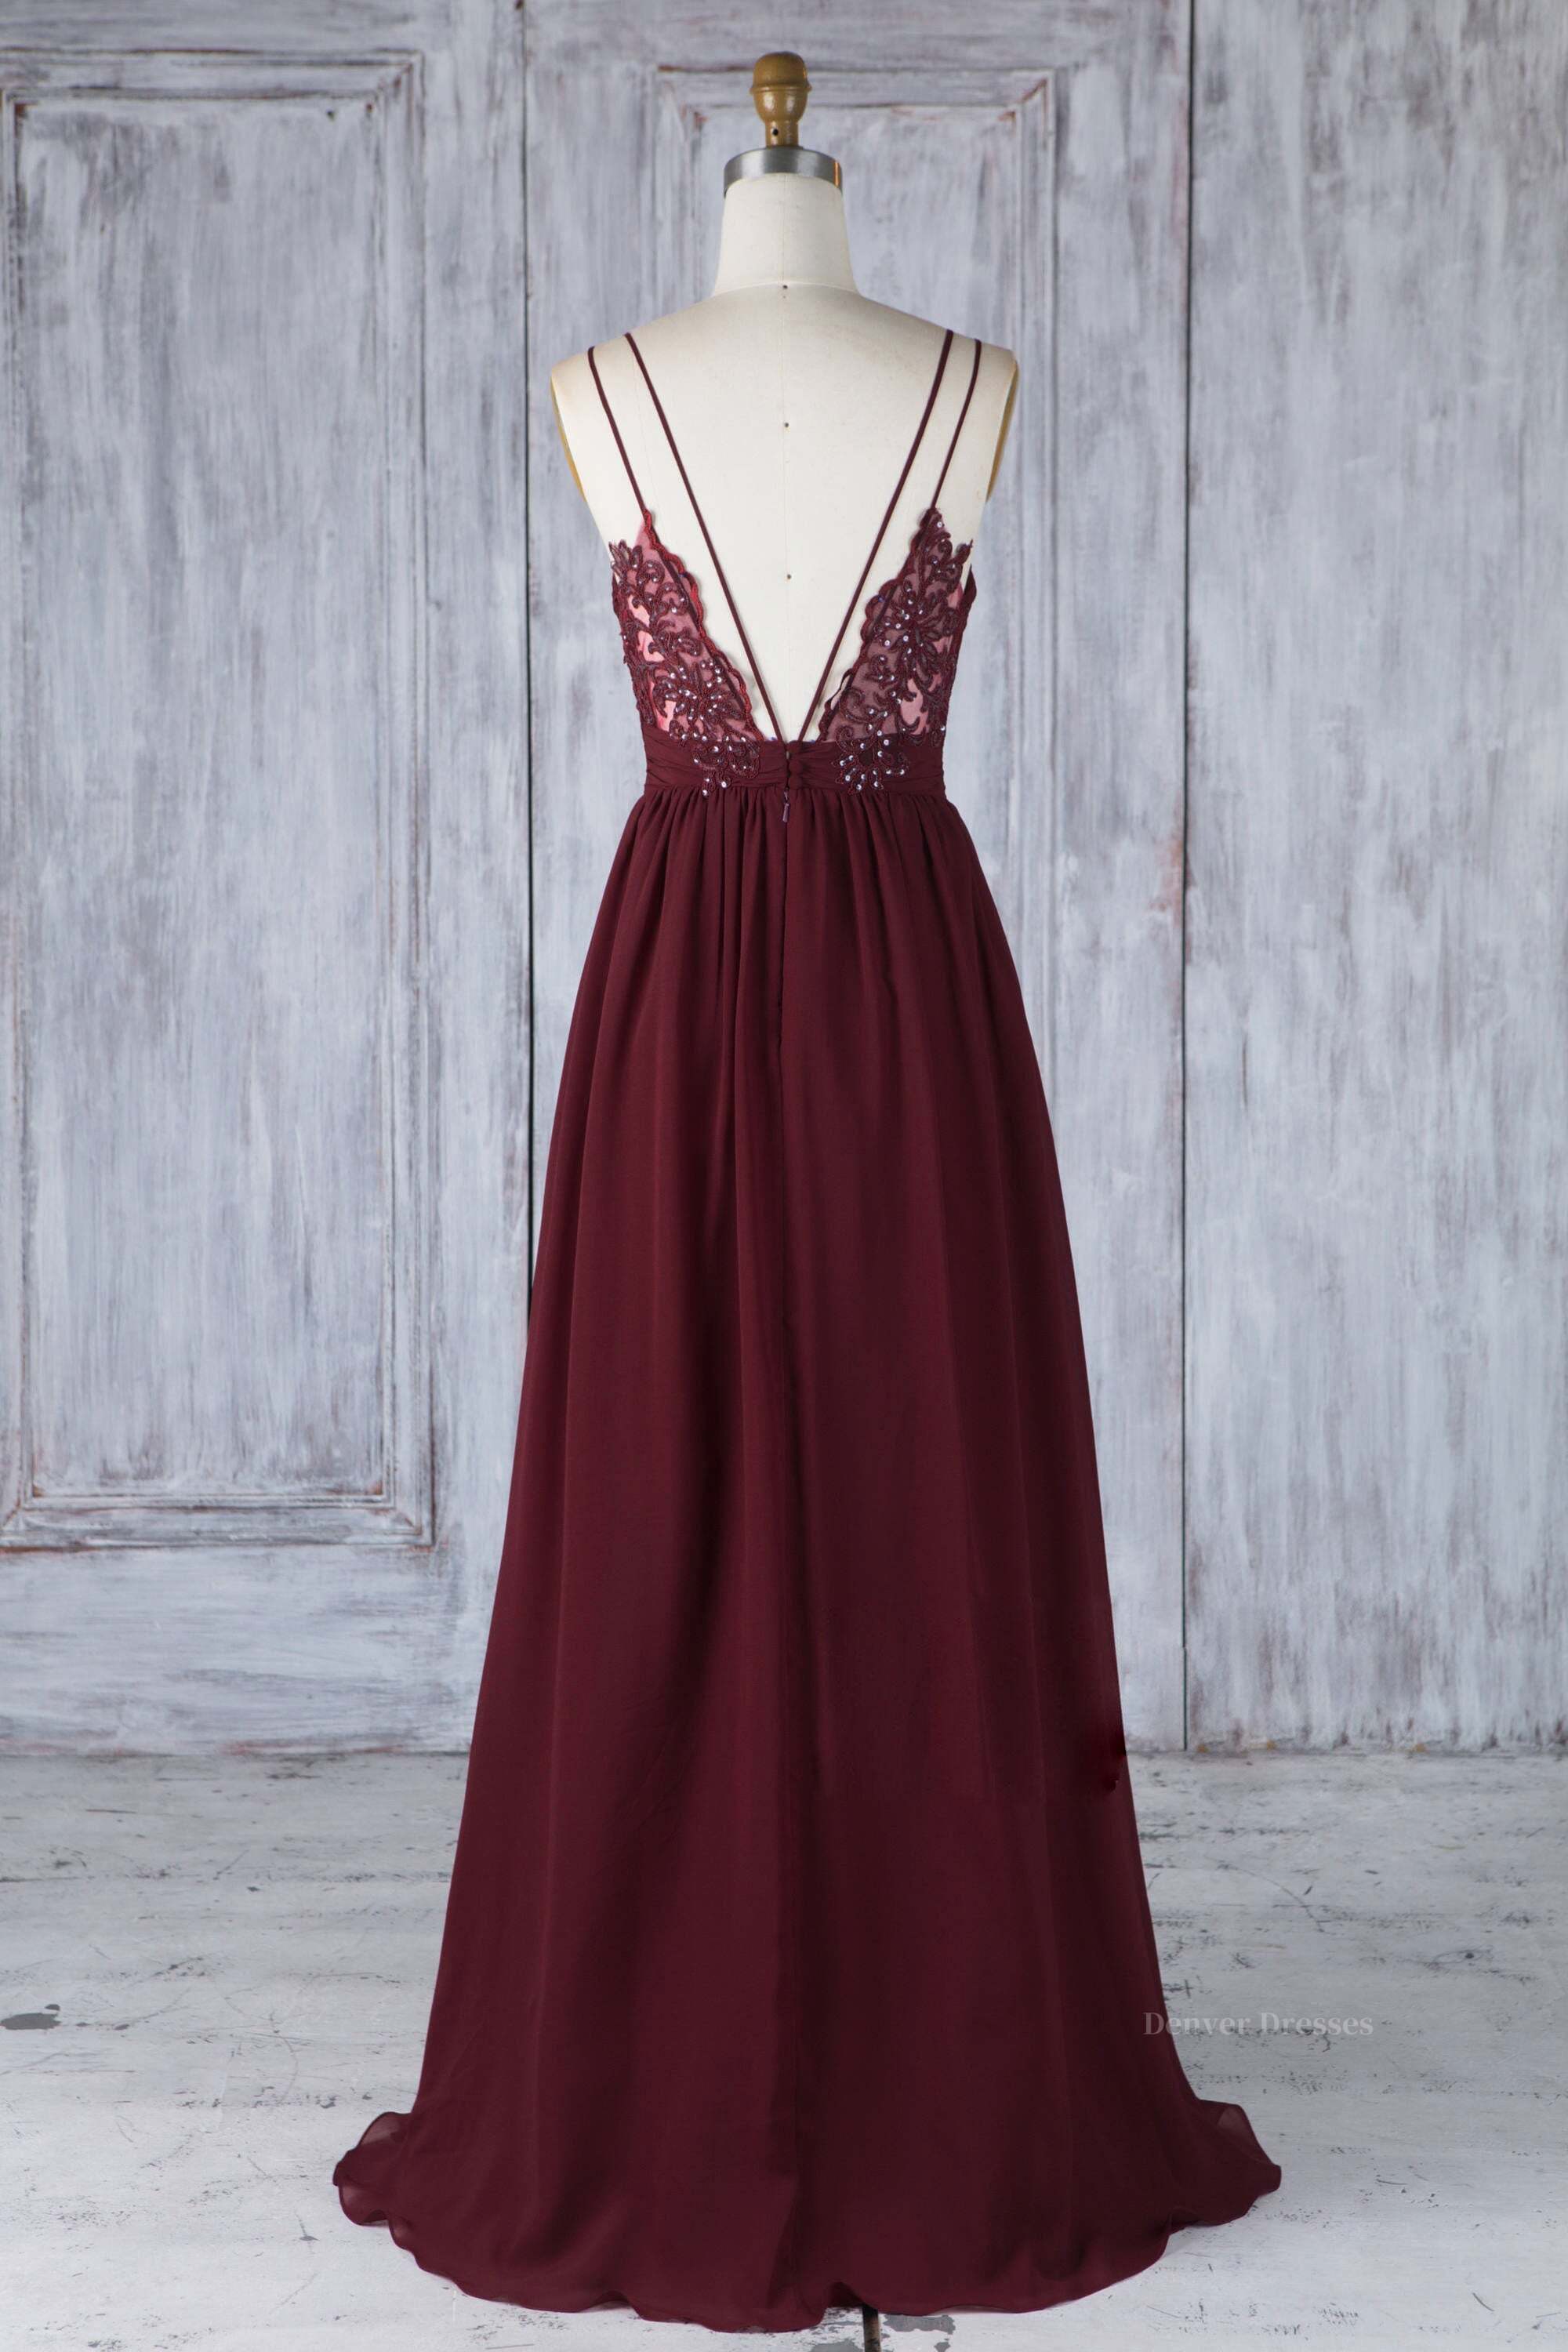 Bridesmaid Dresses Emerald Green, Burgundy tulle lace long prom dress burgundy lace evening dress